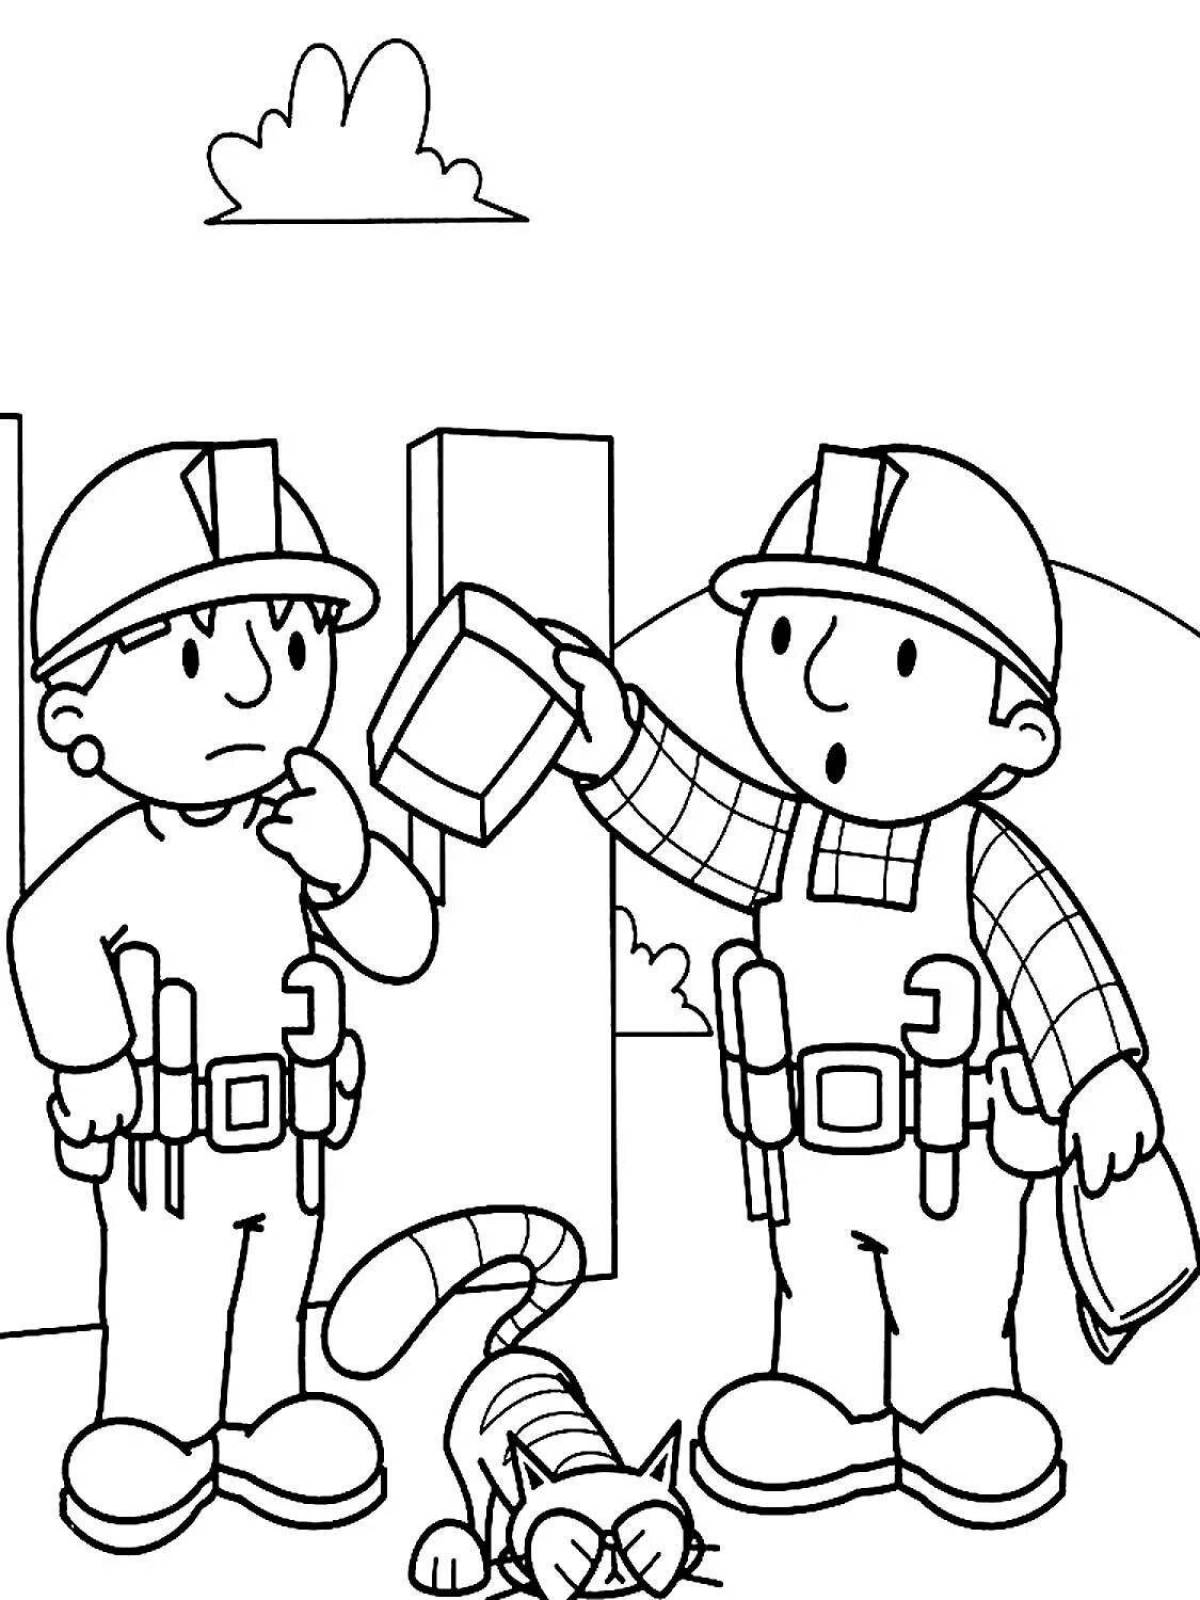 Occupational safety #21